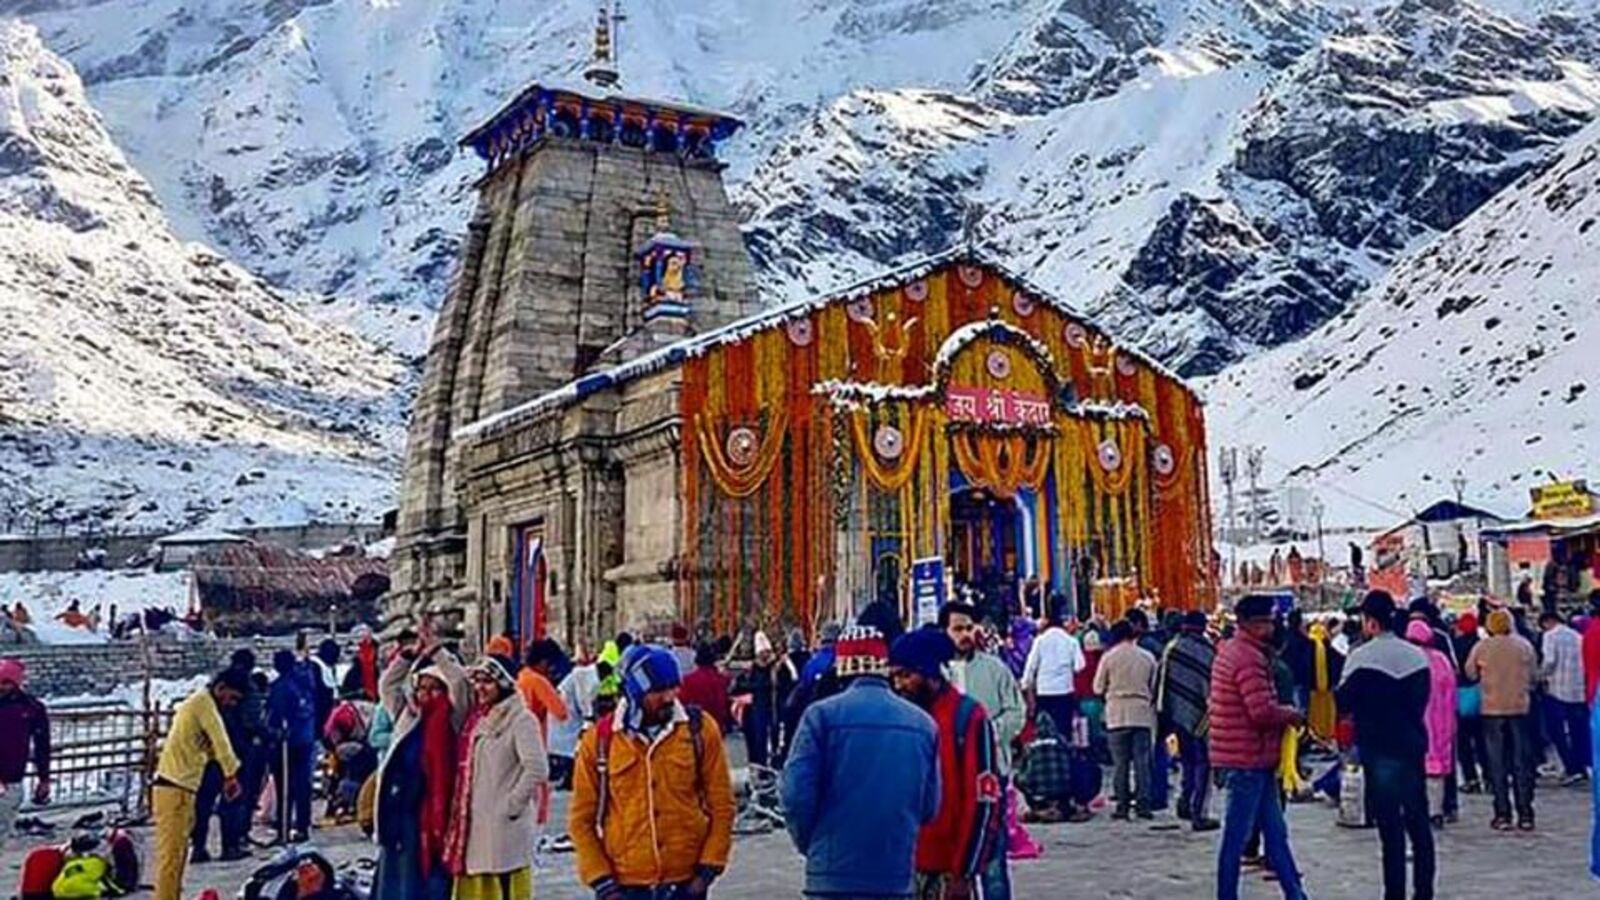 Mobile ban in Kedarnath, will not be able to make calls